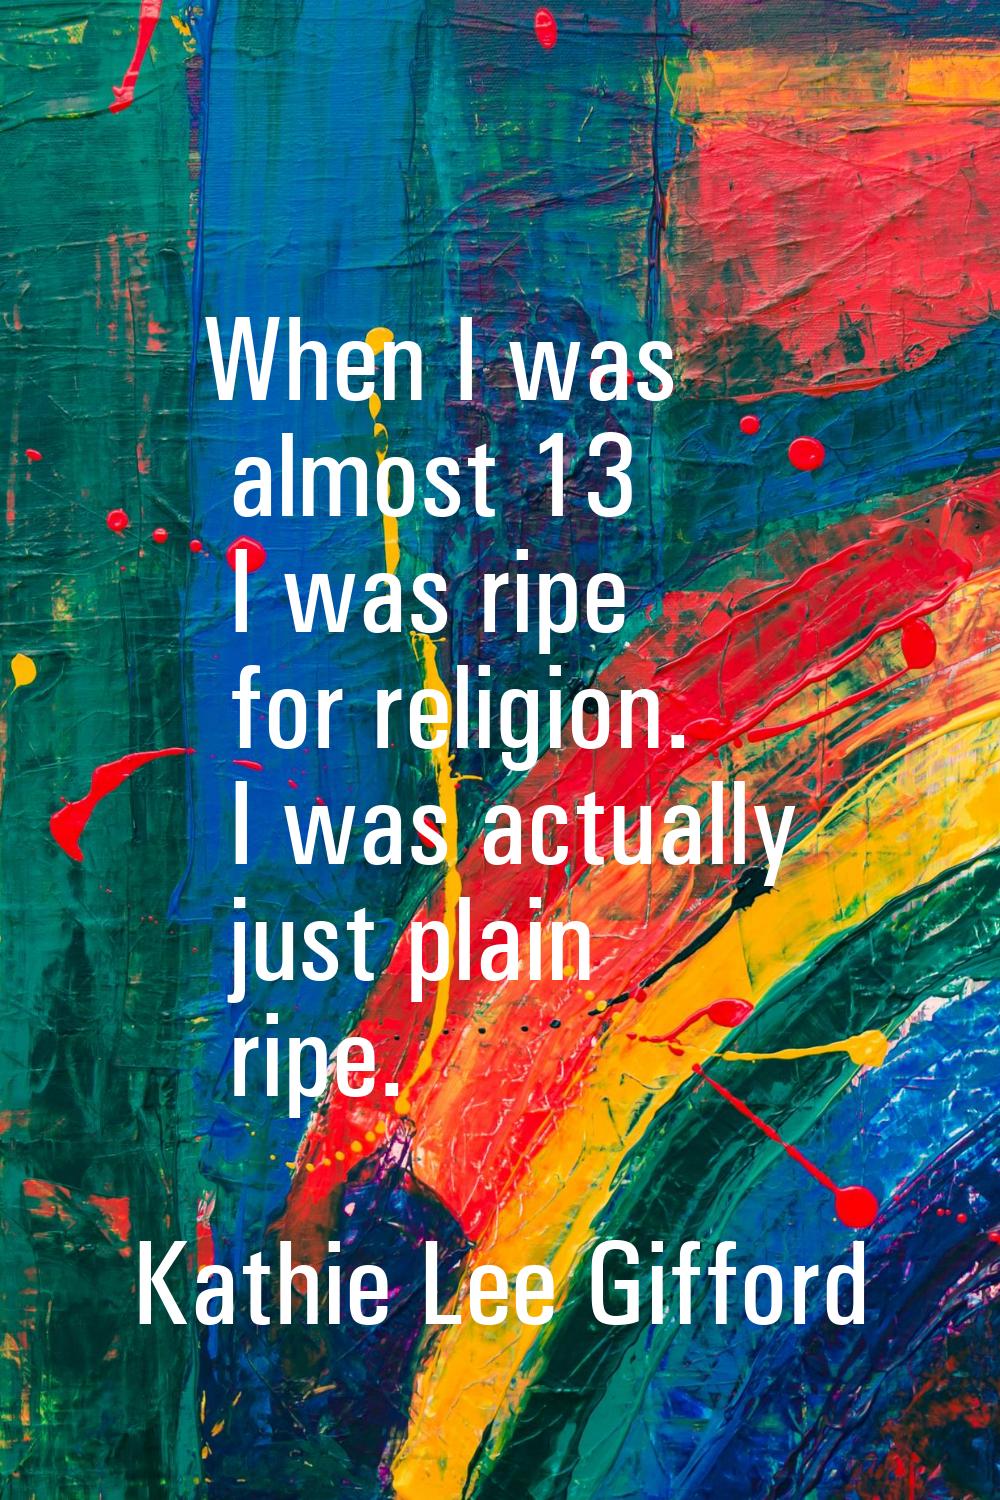 When I was almost 13 I was ripe for religion. I was actually just plain ripe.